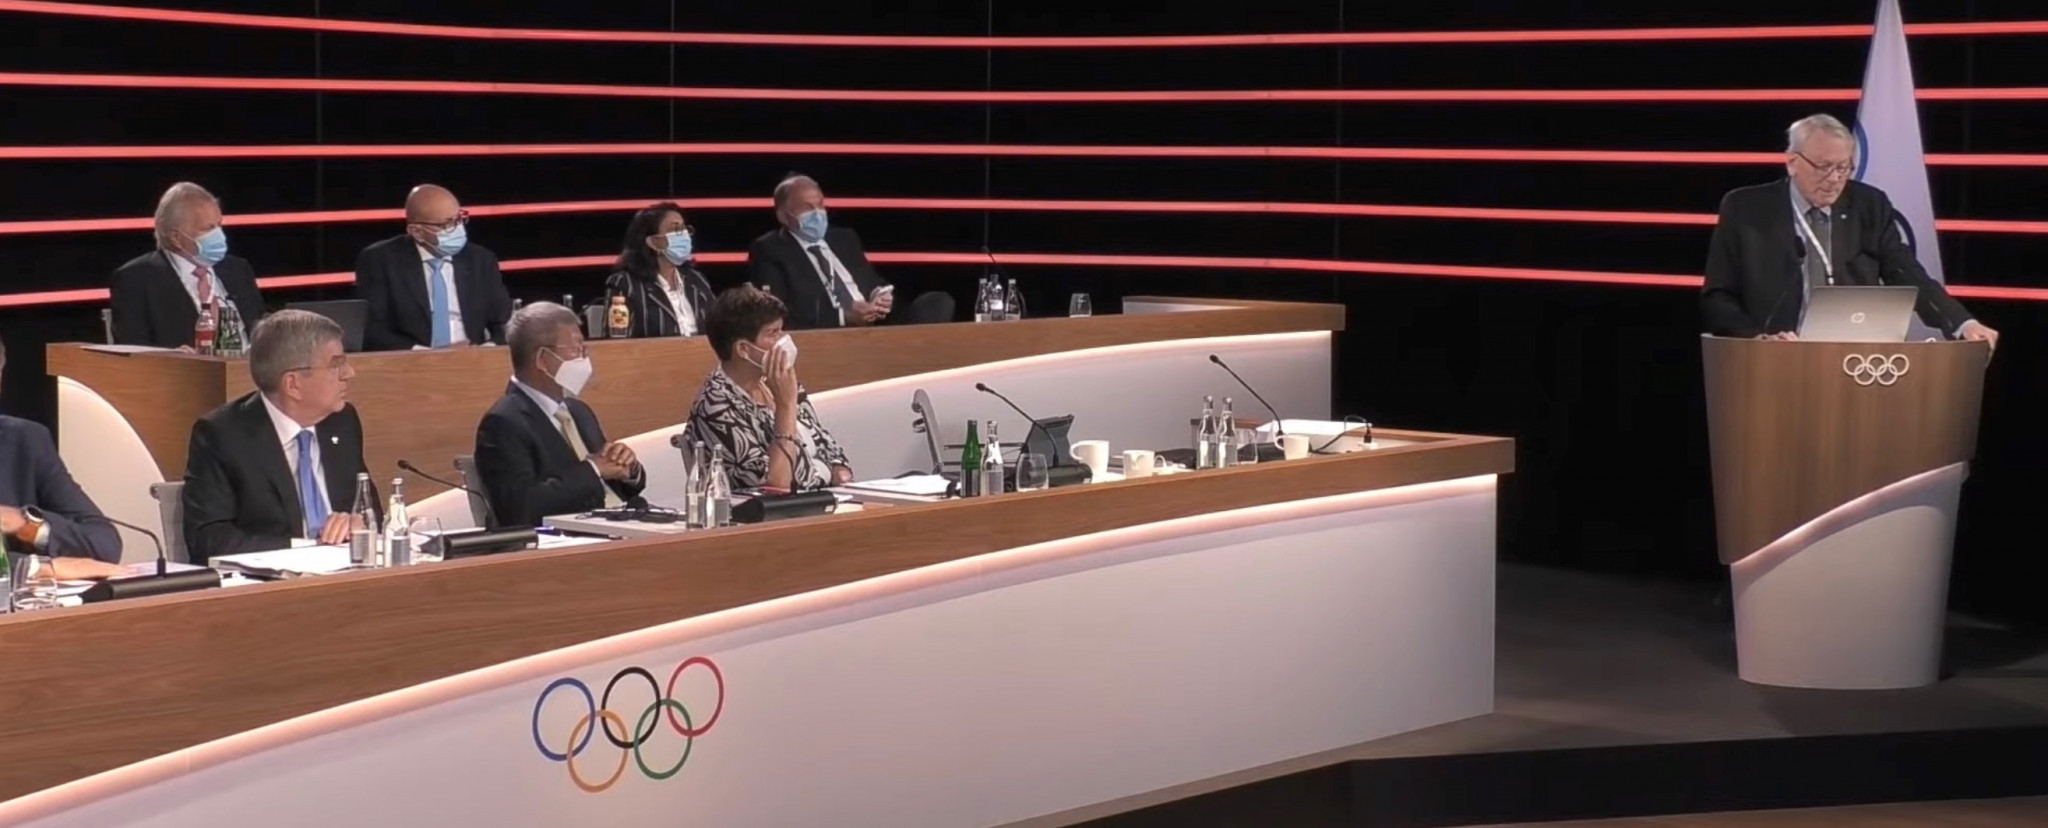 139th International Olympic Committee Session